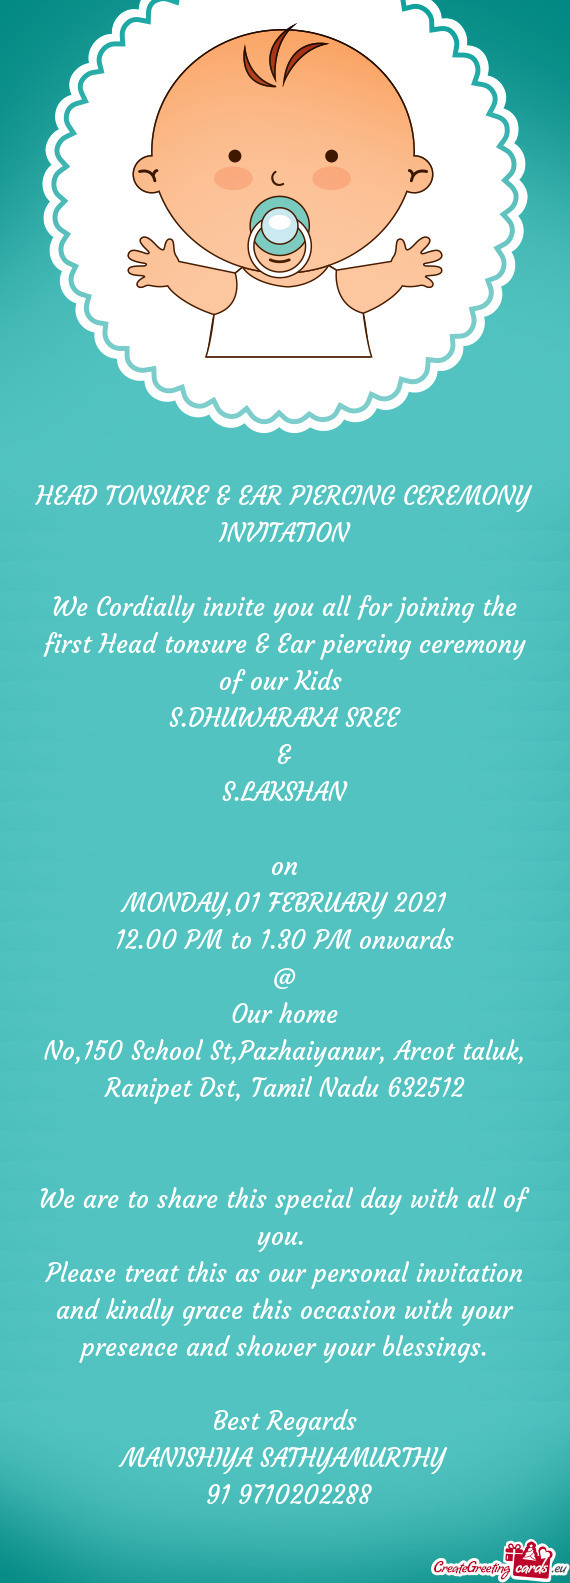 We Cordially invite you all for joining the first Head tonsure & Ear piercing ceremony of our Kids